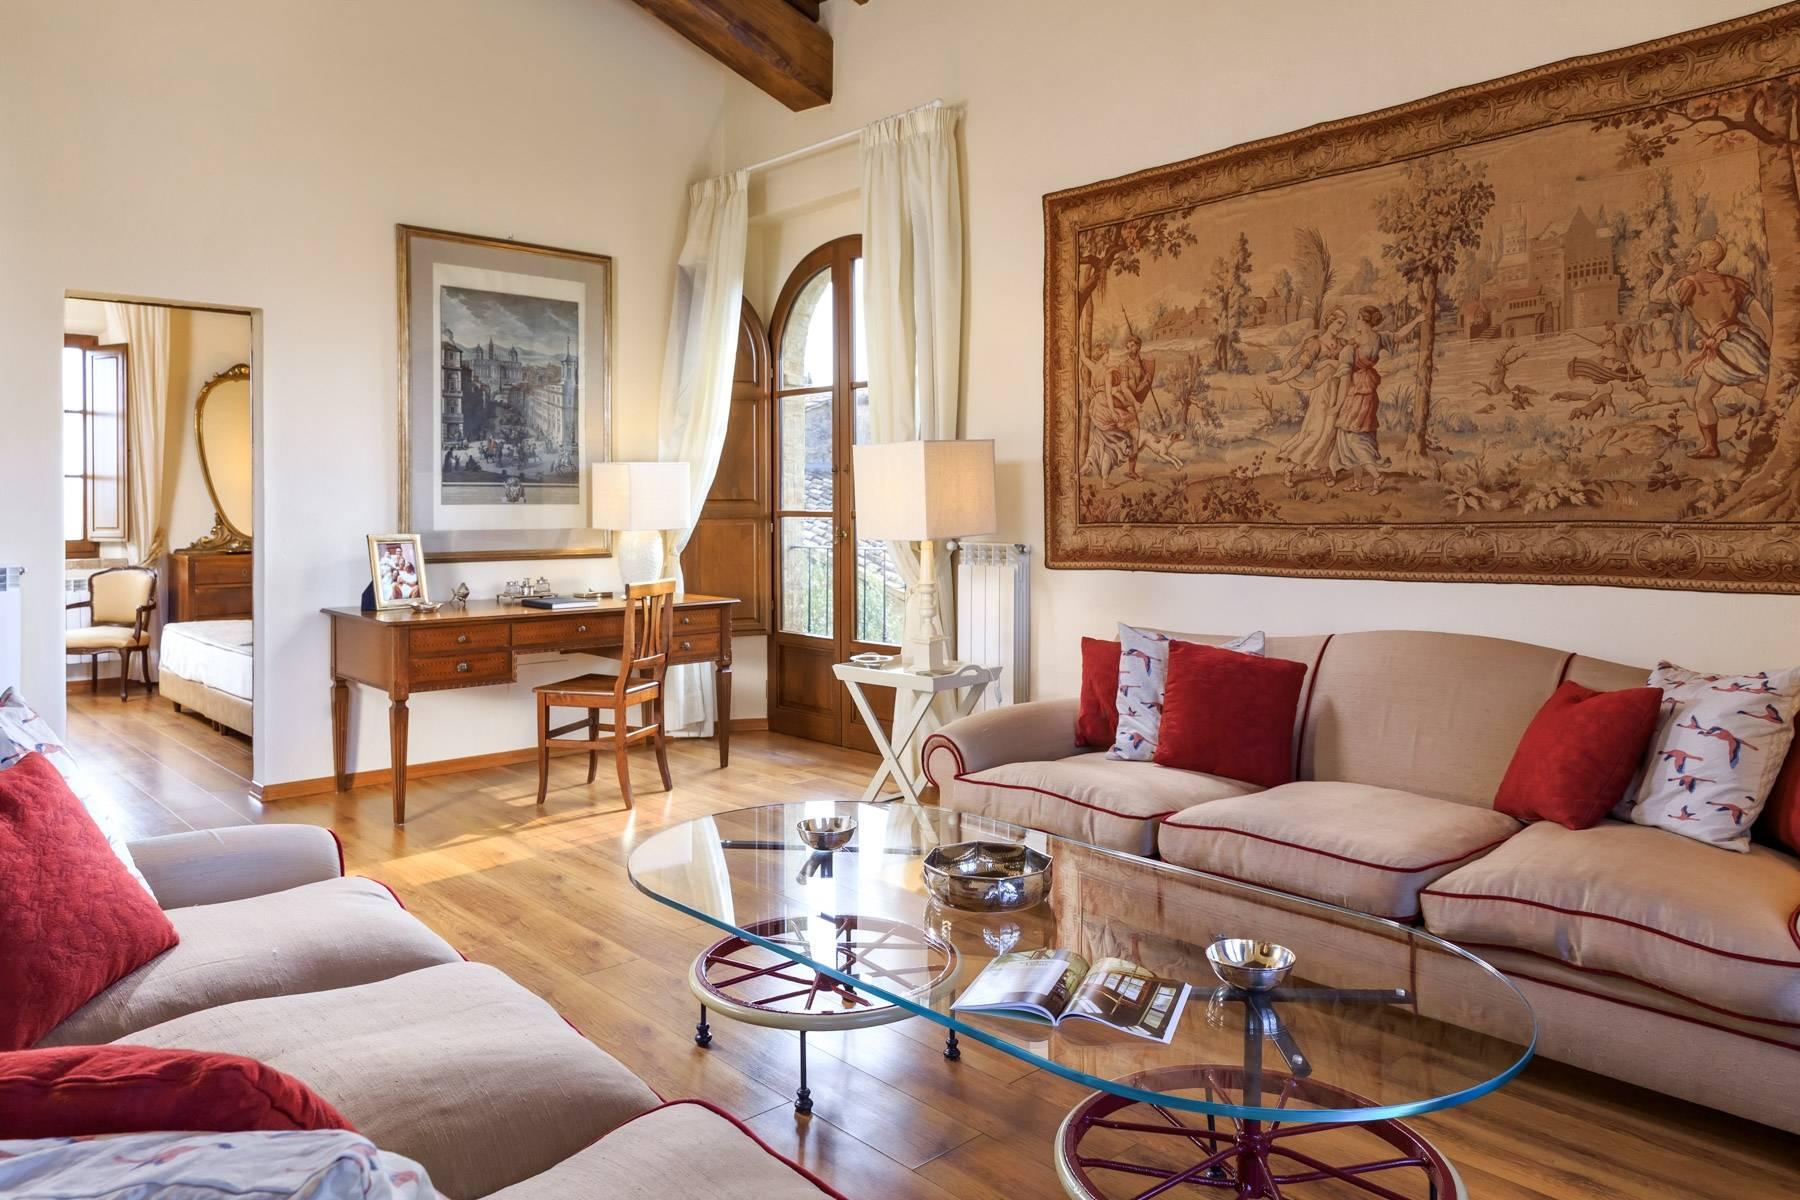 A charming estate in the picturesque Tuscan countryside - 3